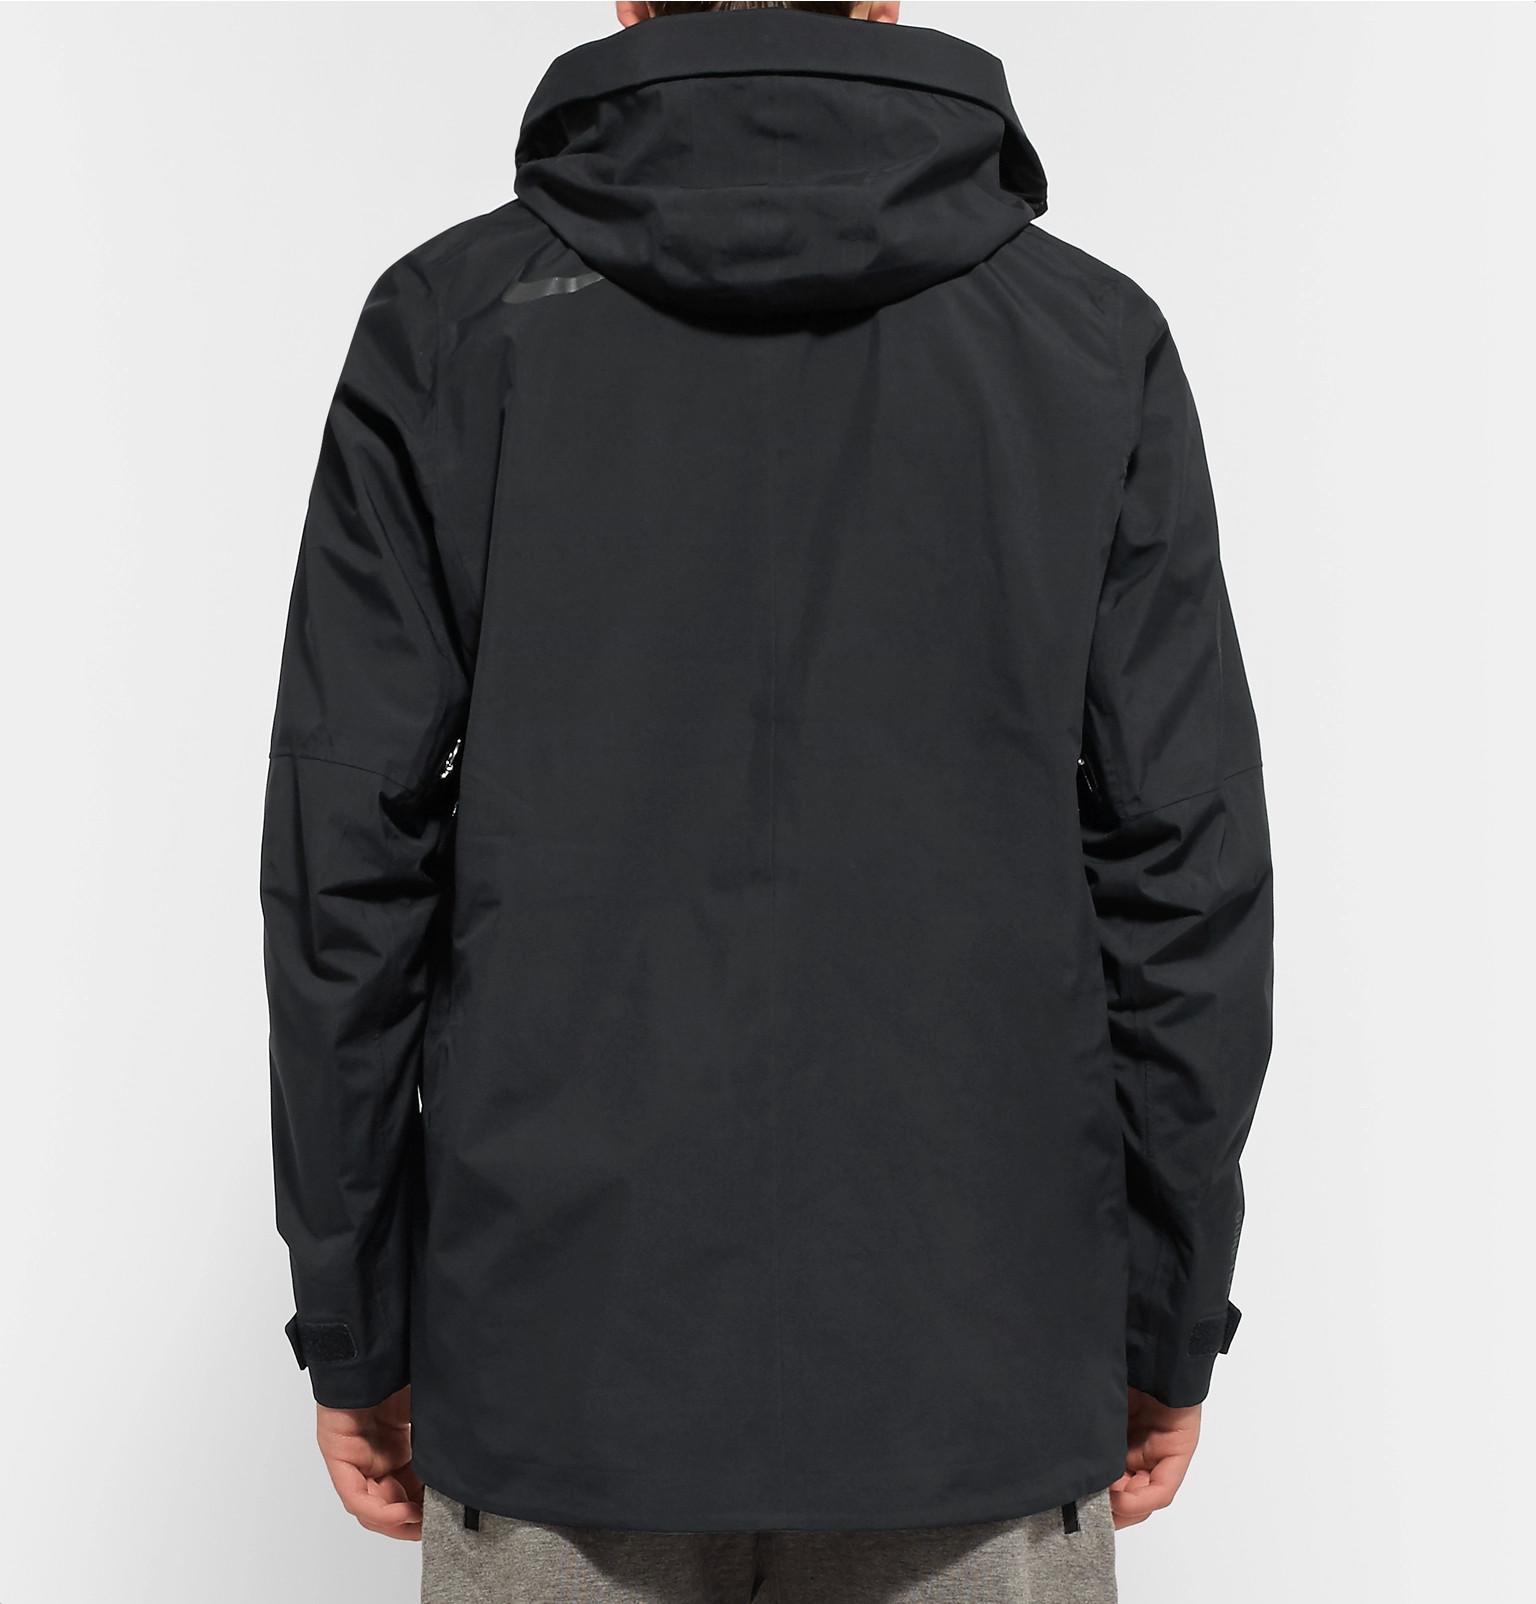 Nike Synthetic Acg Alpine Gore-tex Hooded Jacket in Black for Men - Lyst